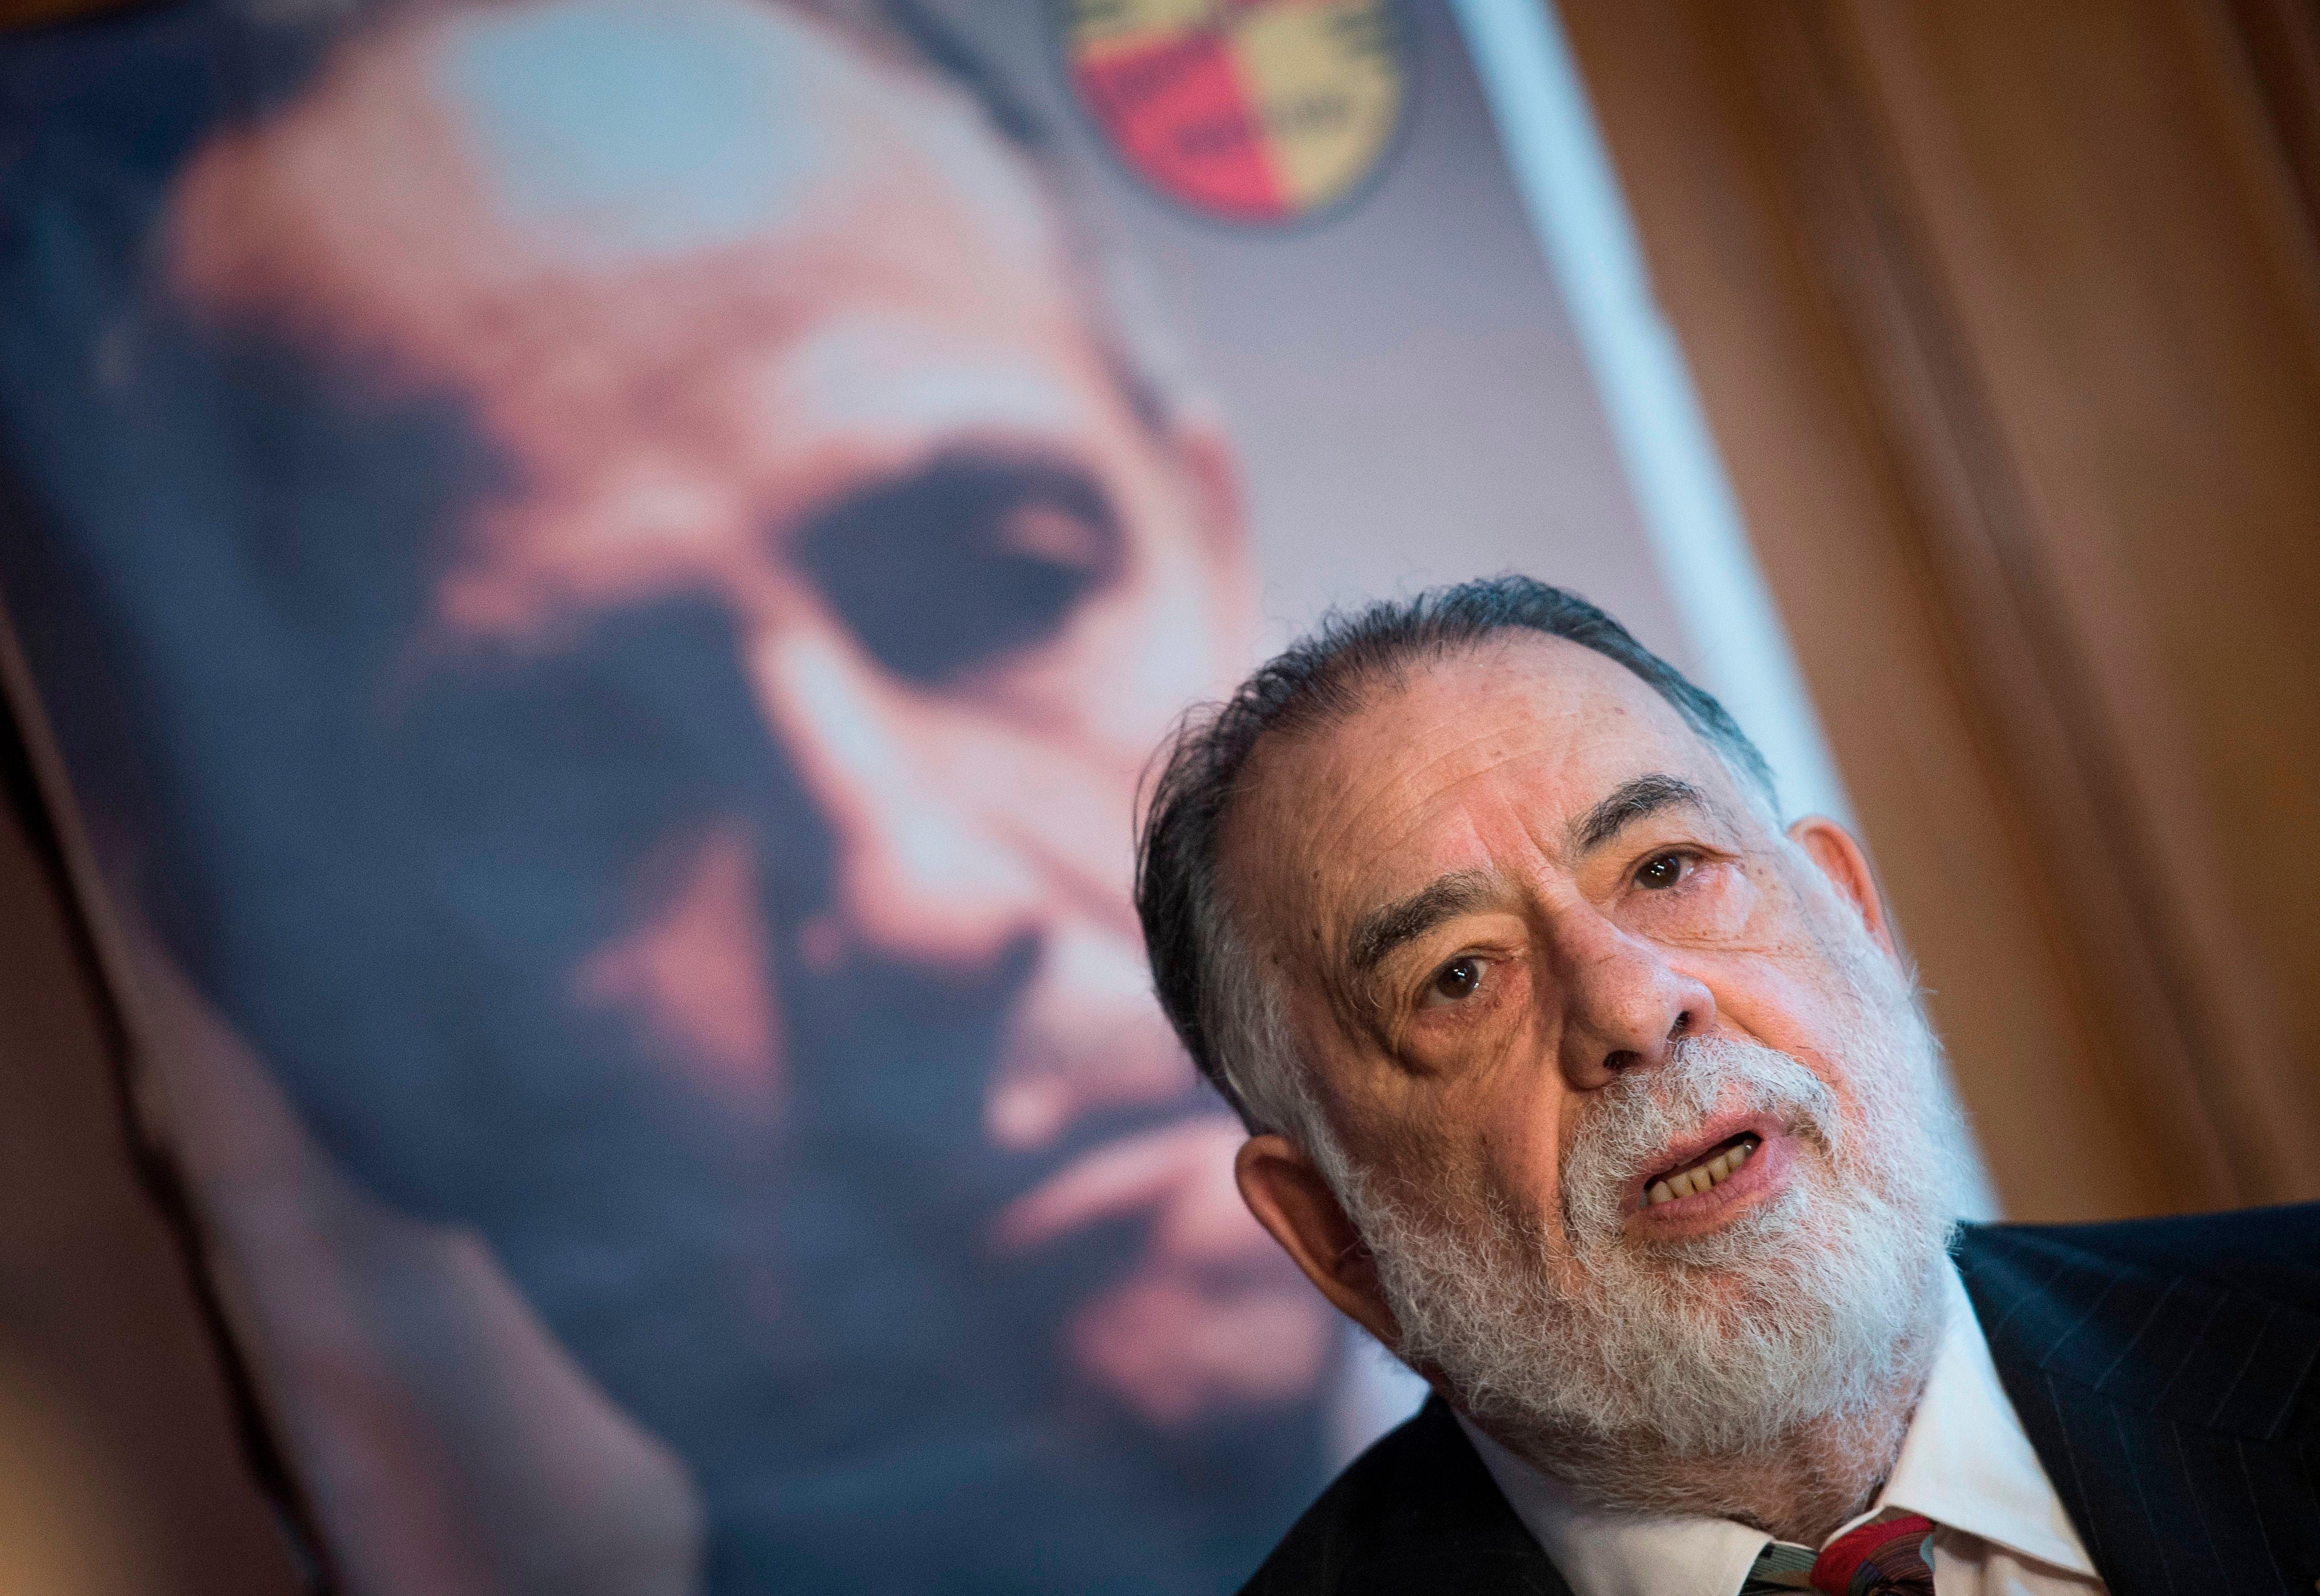 <p>Francis Ford Coppola at the Stockholm Film Festival in 2016</p>